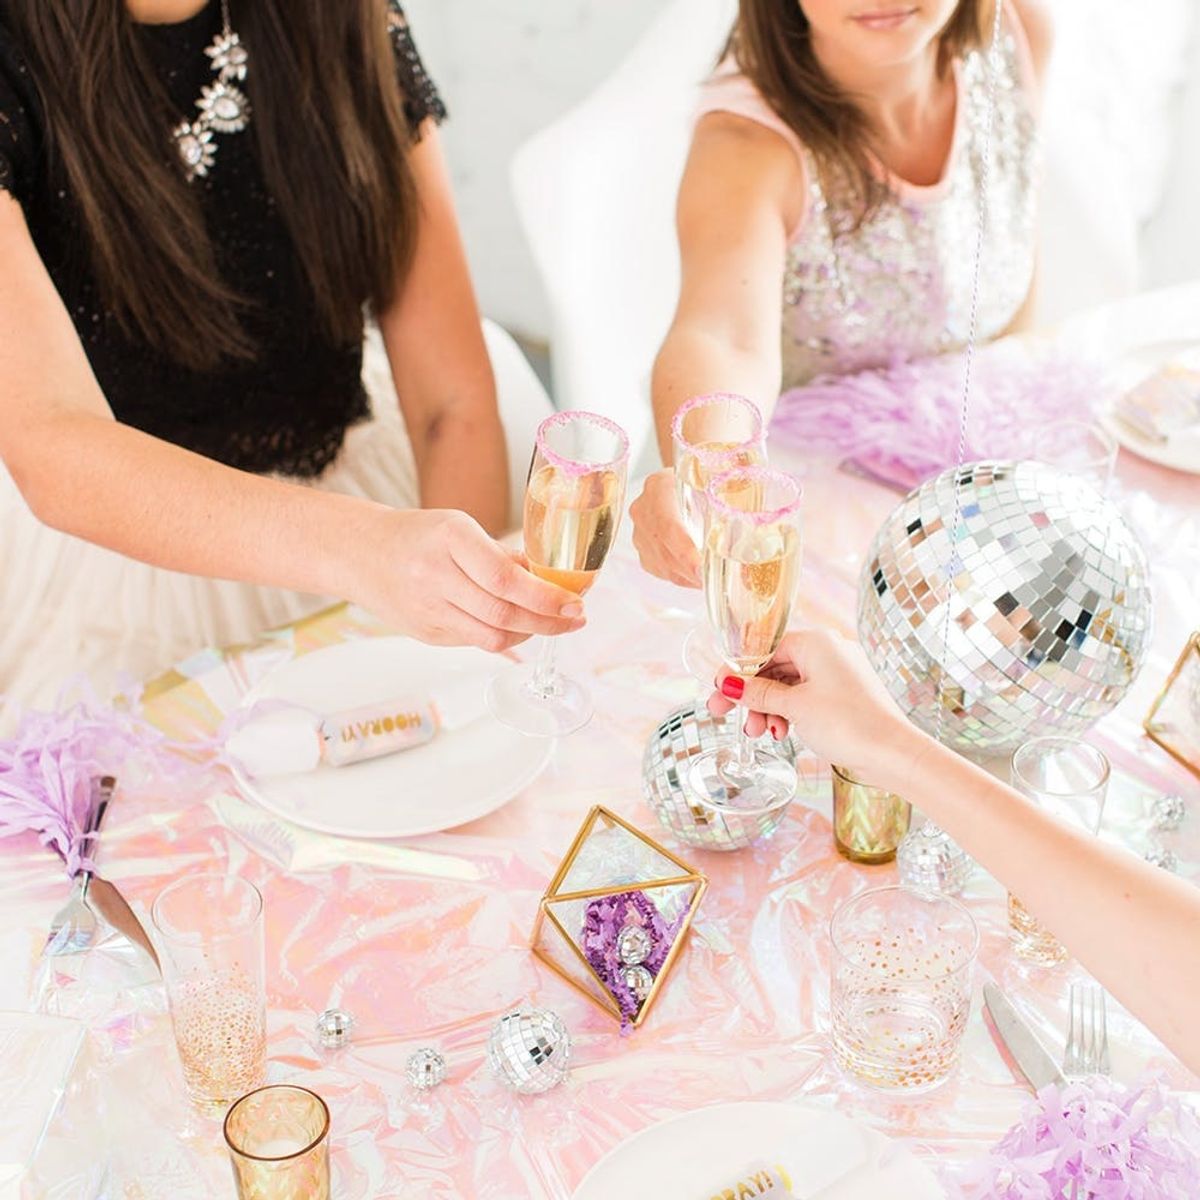 5 Must-Makes for a Glitzy Pantone-Inspired NYE Bash